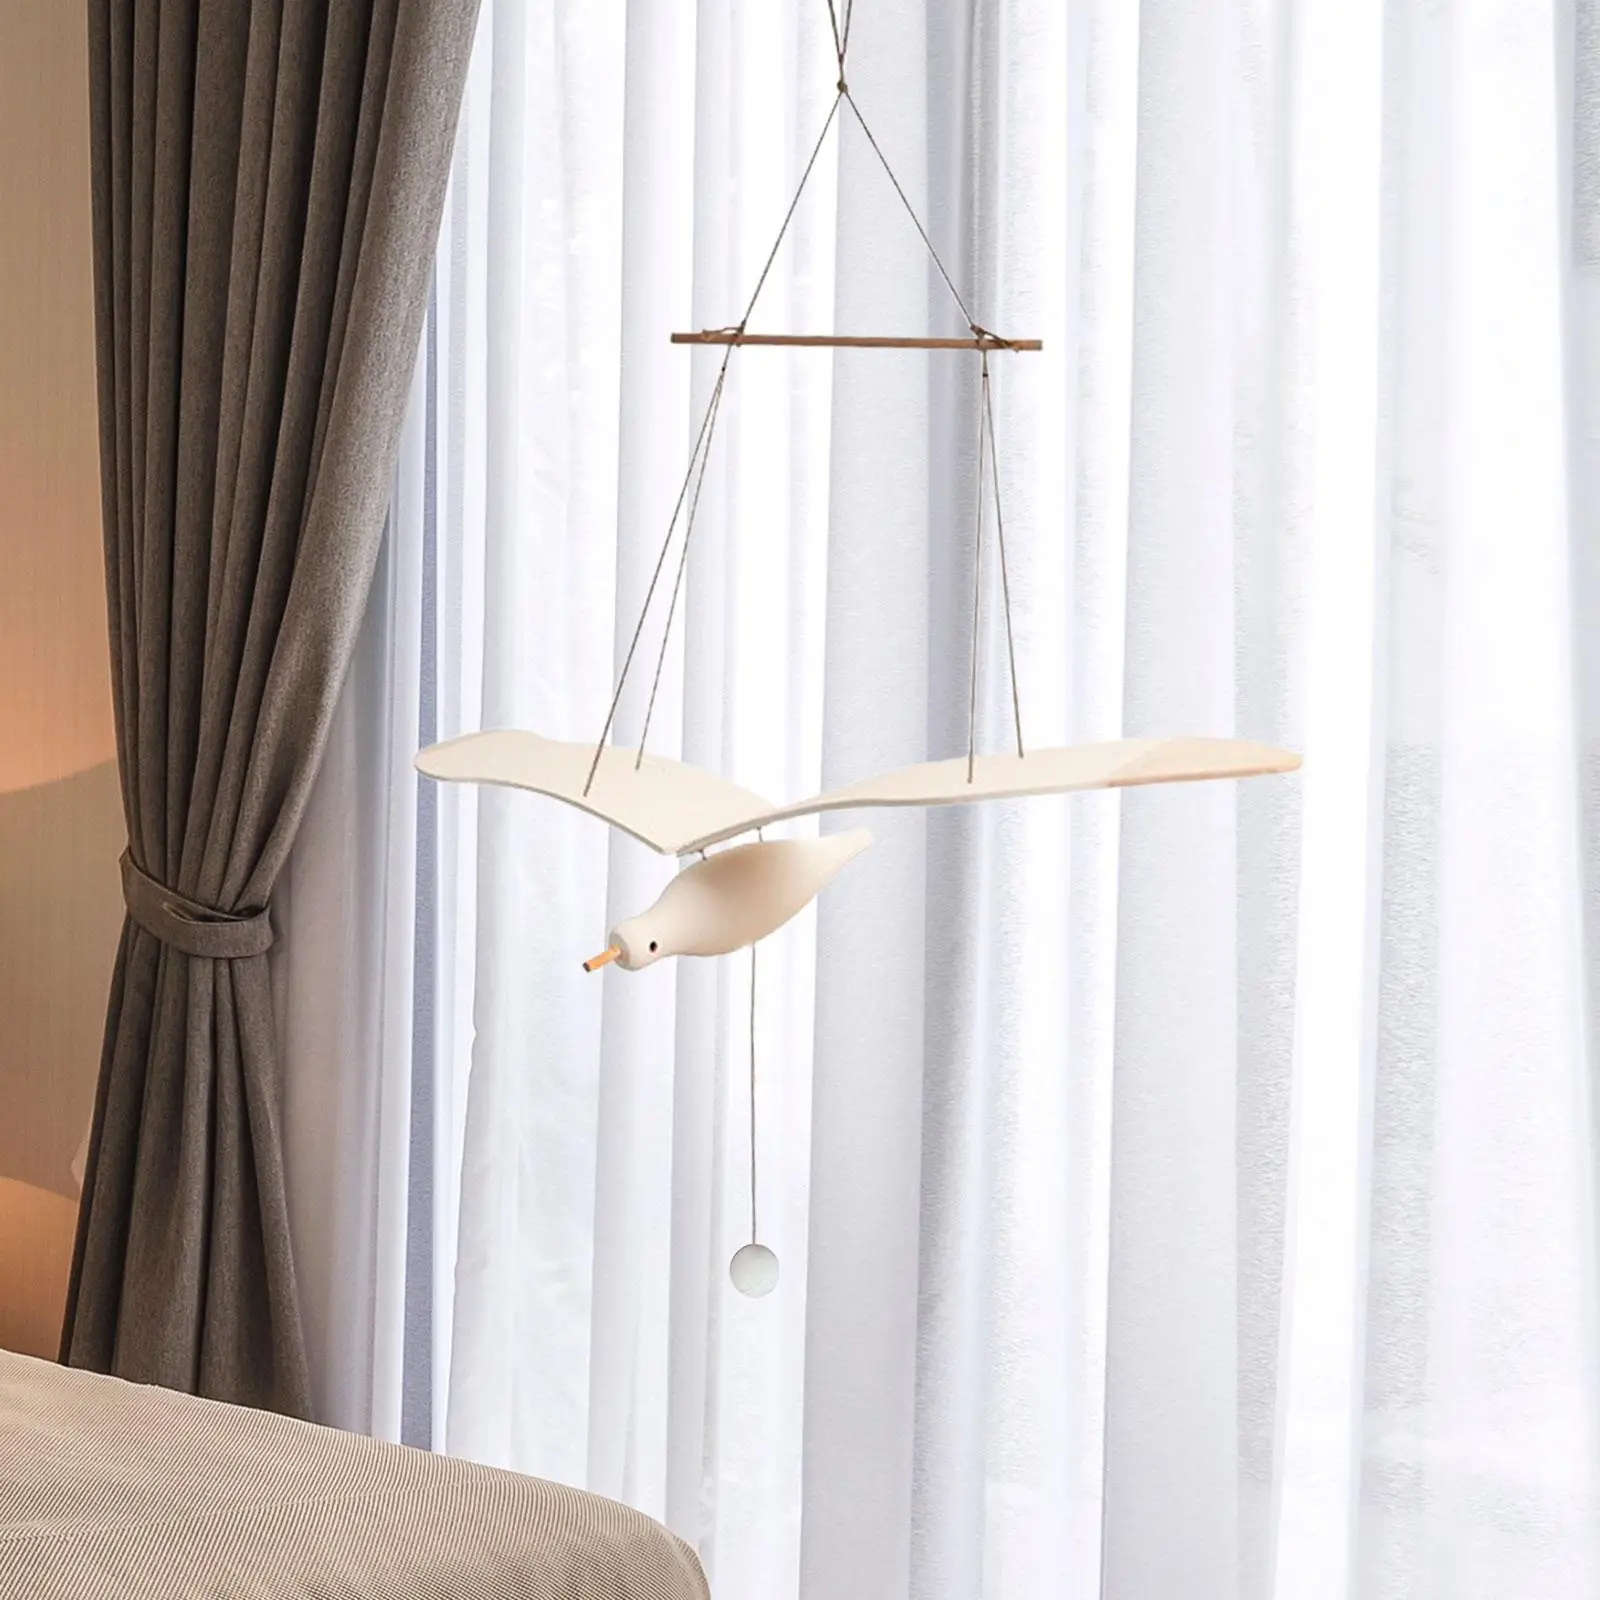 Seagull Mobile Creative Unique Animals Art Crafts Ornament Hanging Soaring Seagulls for Ceiling Living Room Bedroom